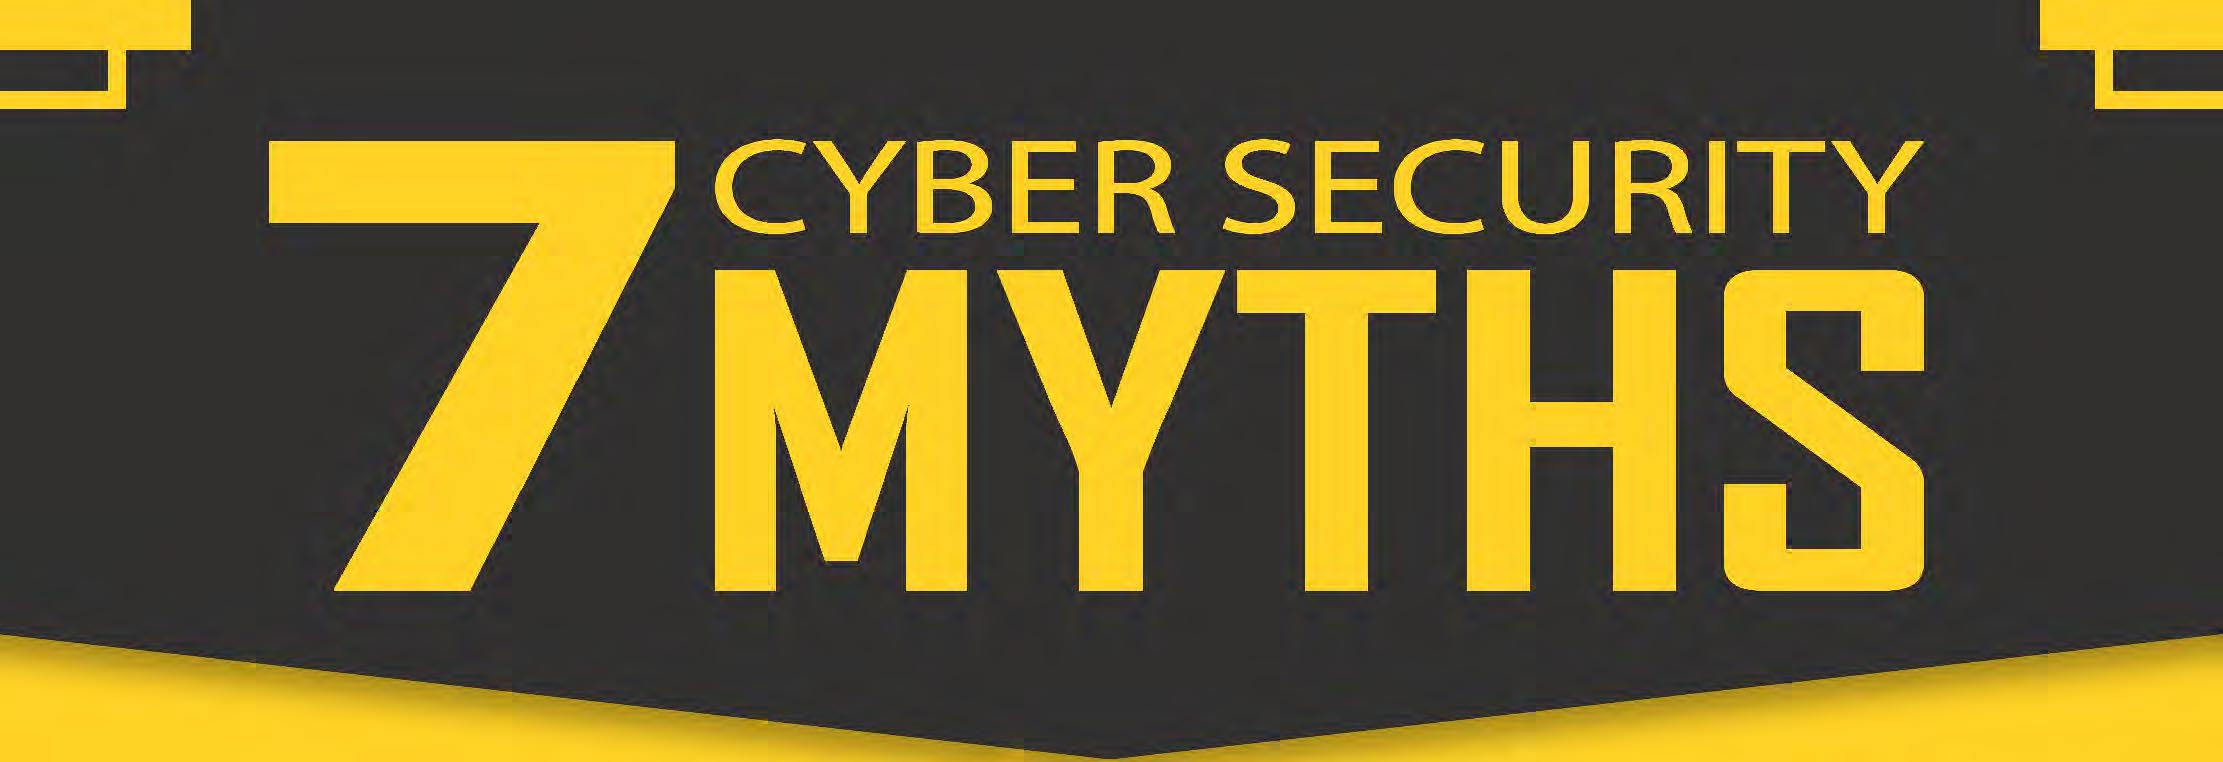 7 Cyber Security Myths Debunked - With Free Infographic